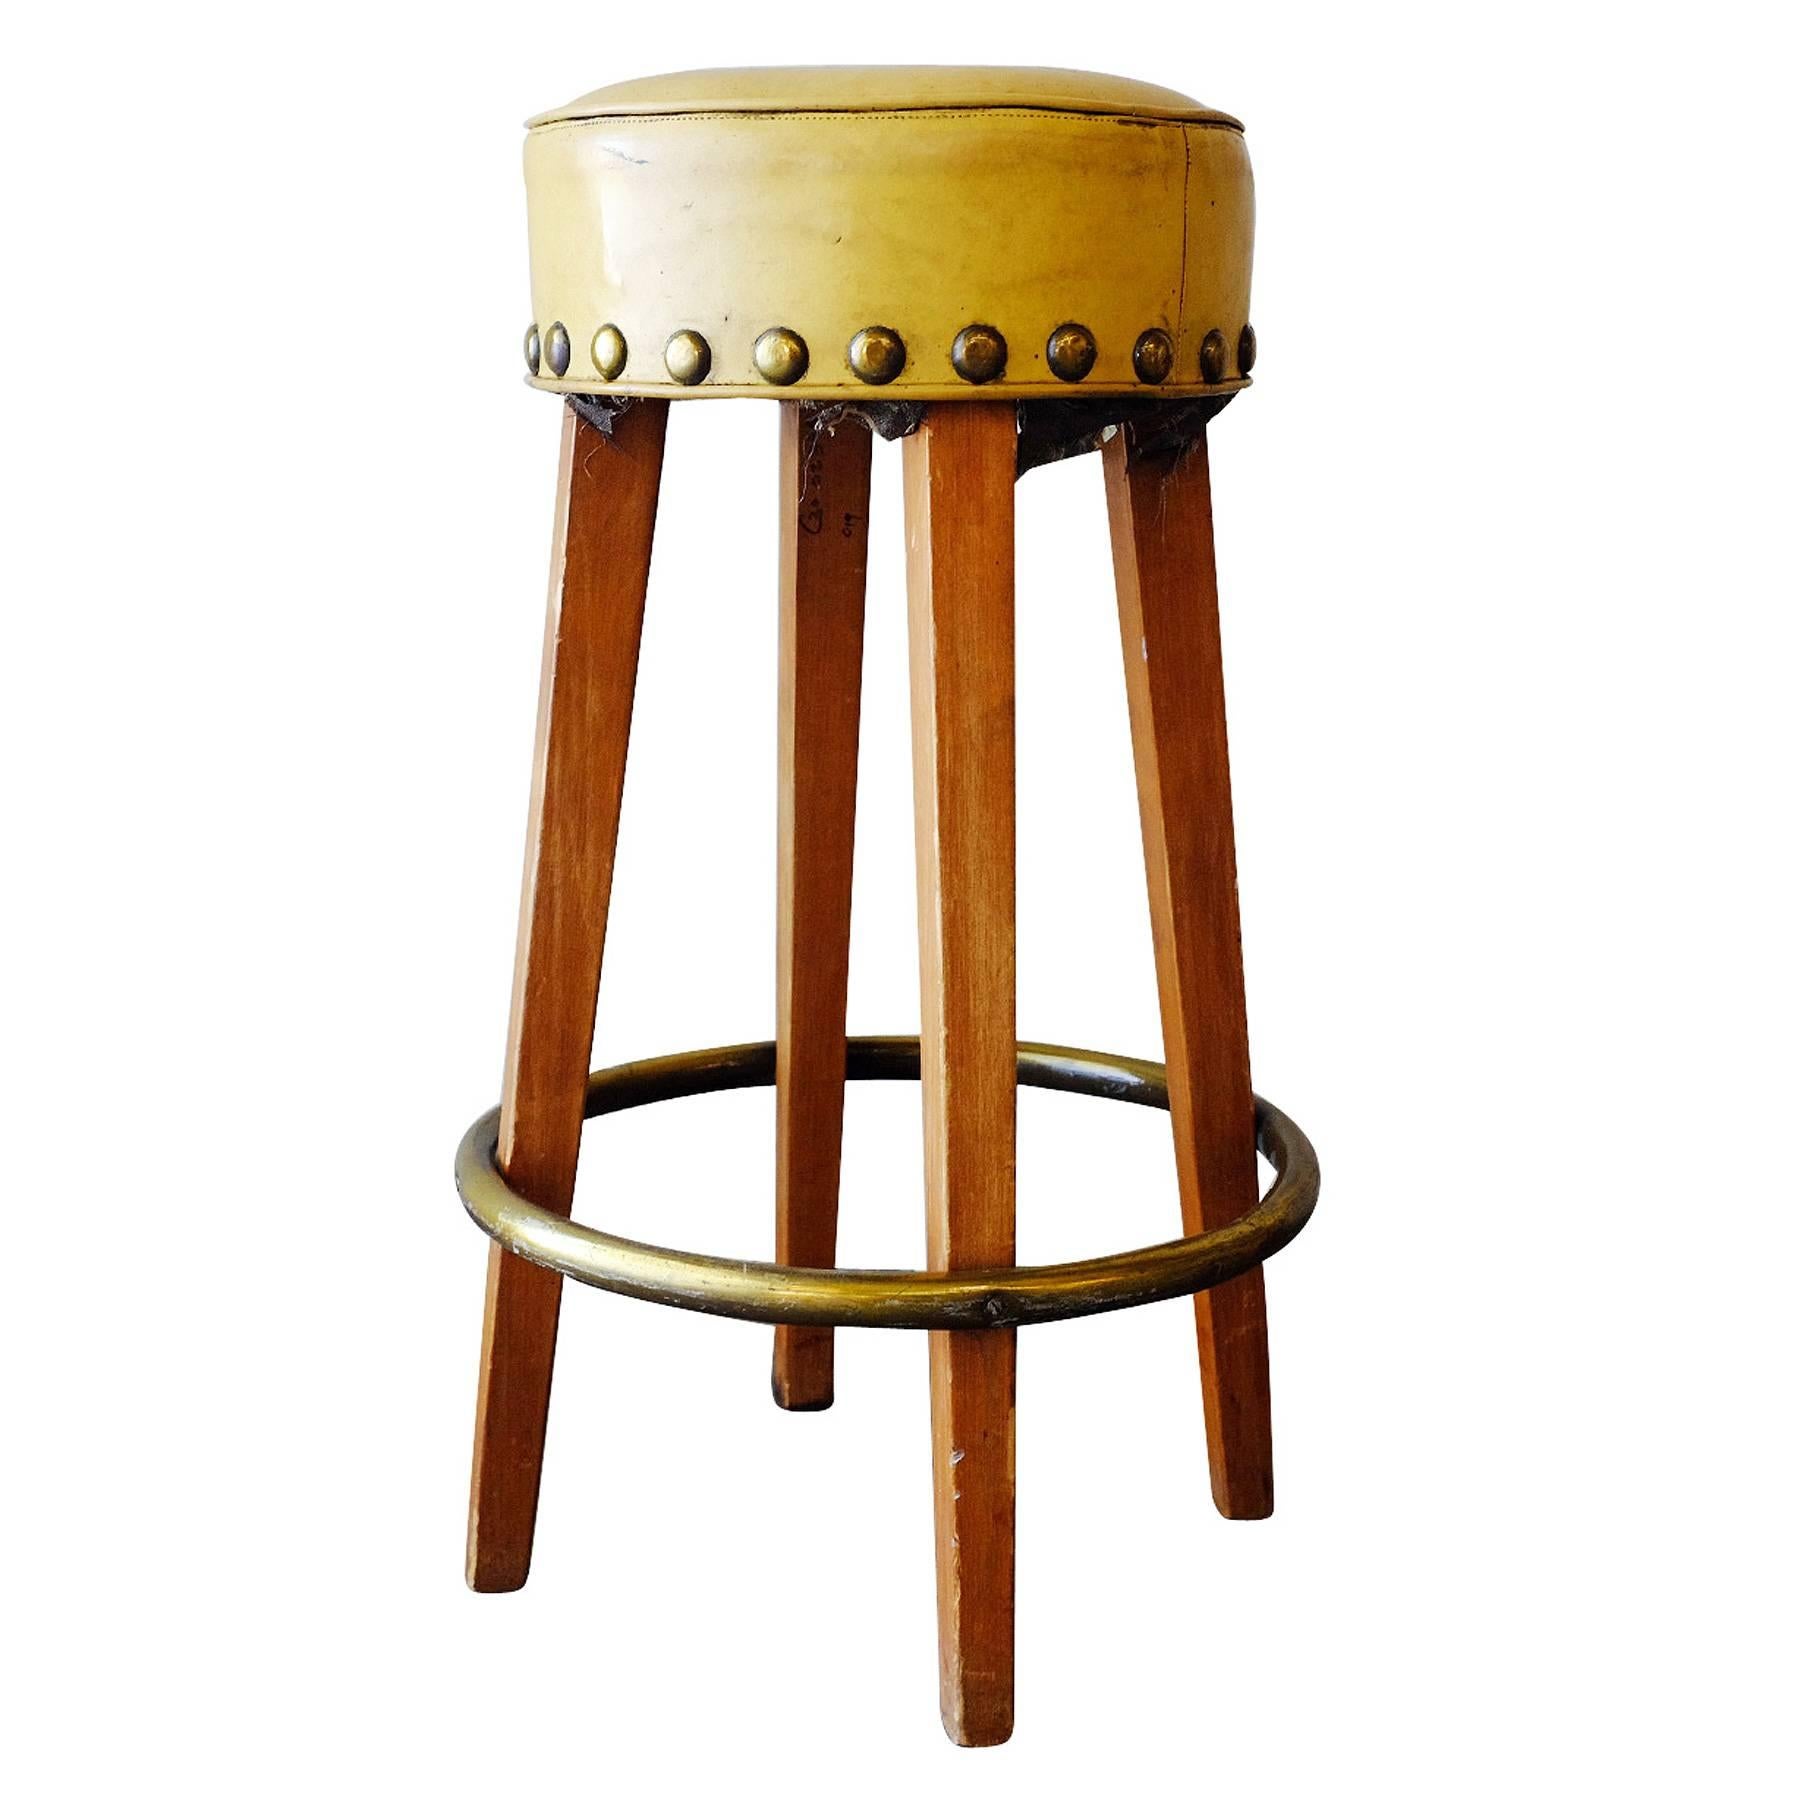 Set of three vintage hand made custom-made mid-century bar stool made from tapered oak legs with a round brass footrest that connect to a yellow vinyl seat. The seat has wraparound oversized nail-head accents.

 